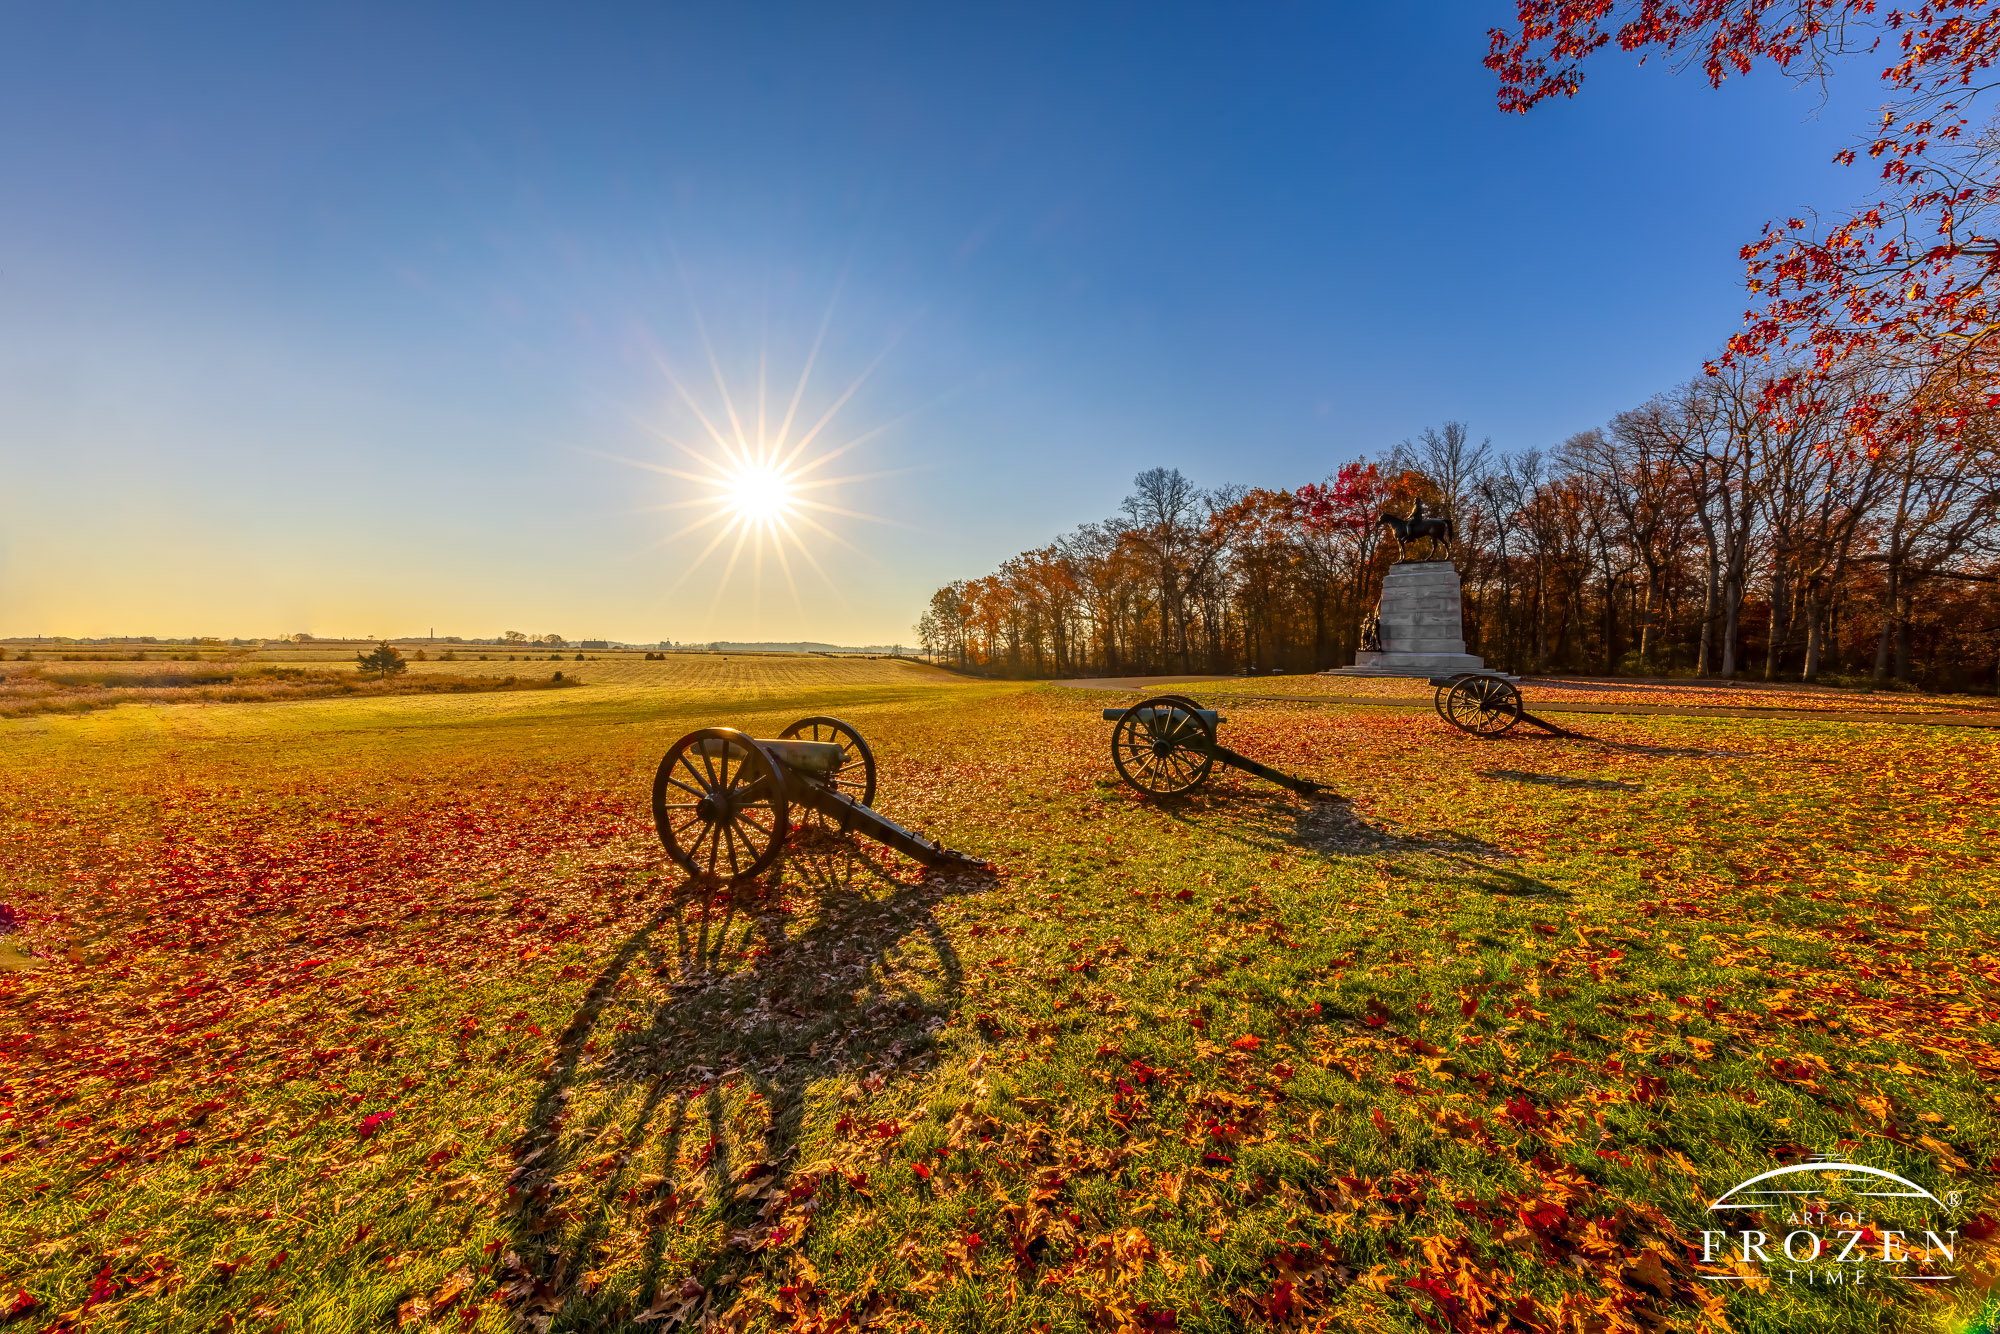 A battery of Civil War cannons at Gettysburg National Military Park on an autumn morning while a monument to Virginia lies in the distance.